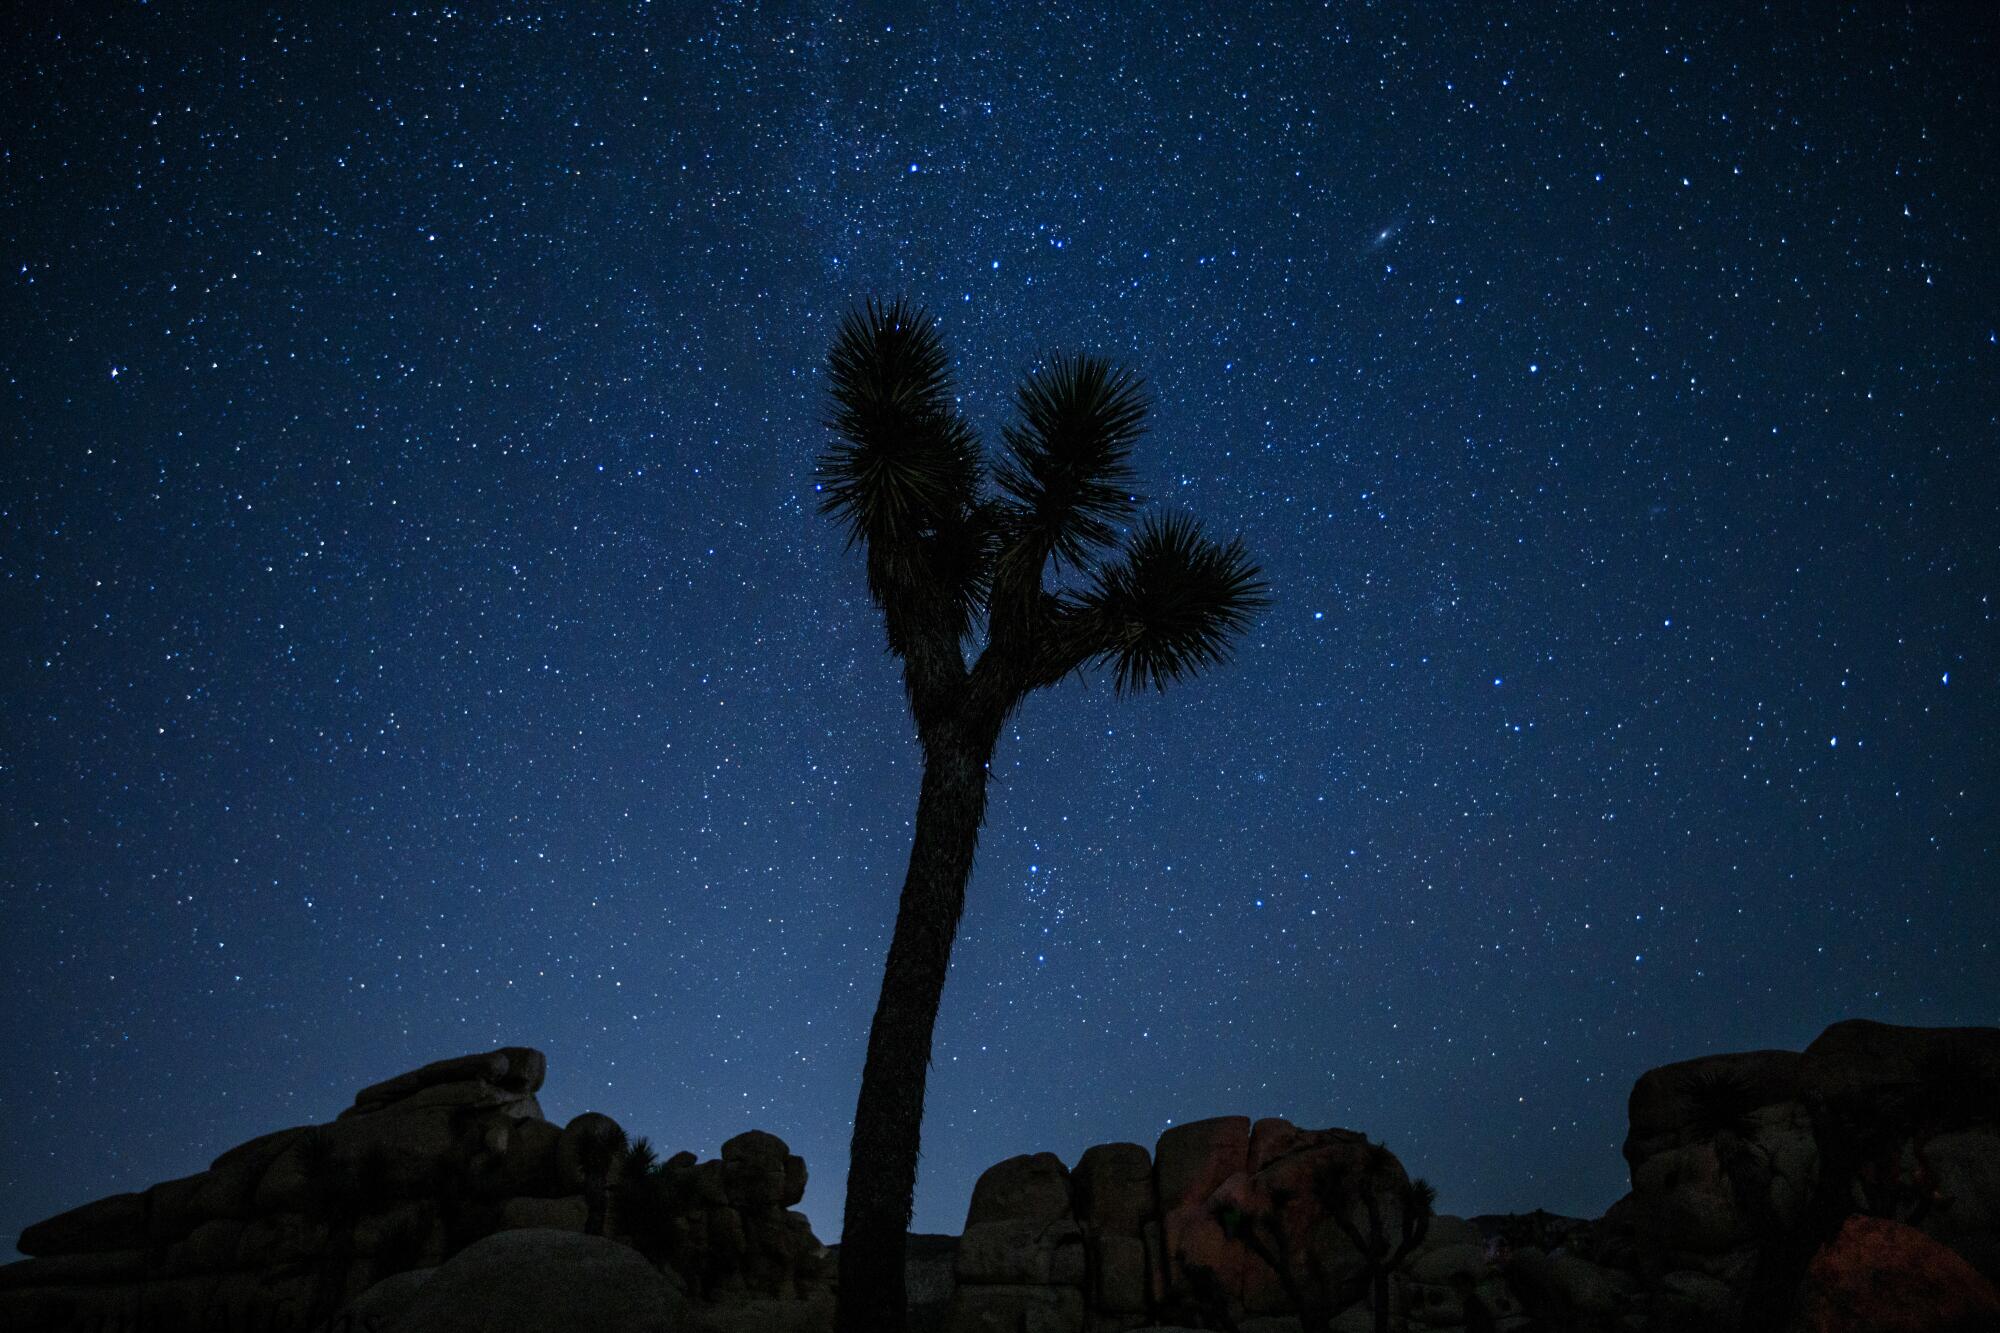 A silhouette of a Joshua tree against the starry night sky.